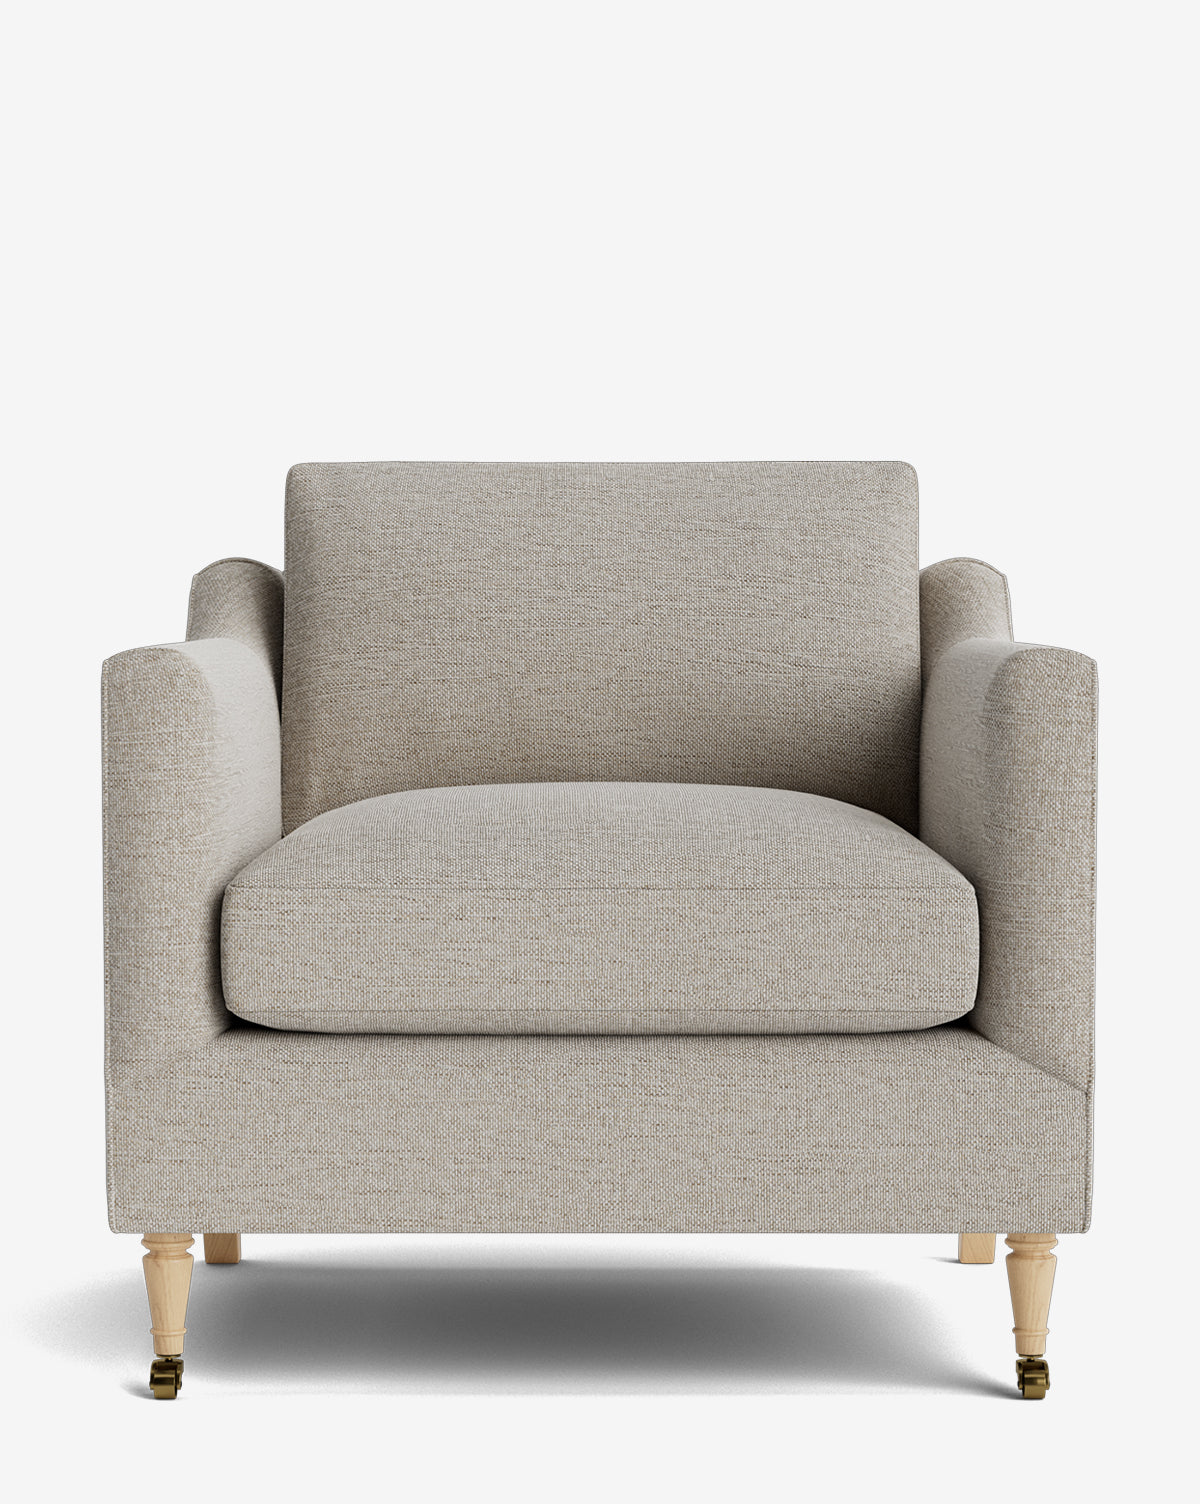 Rowe Fine Furniture, Haverford Upholstered Lounge Chair